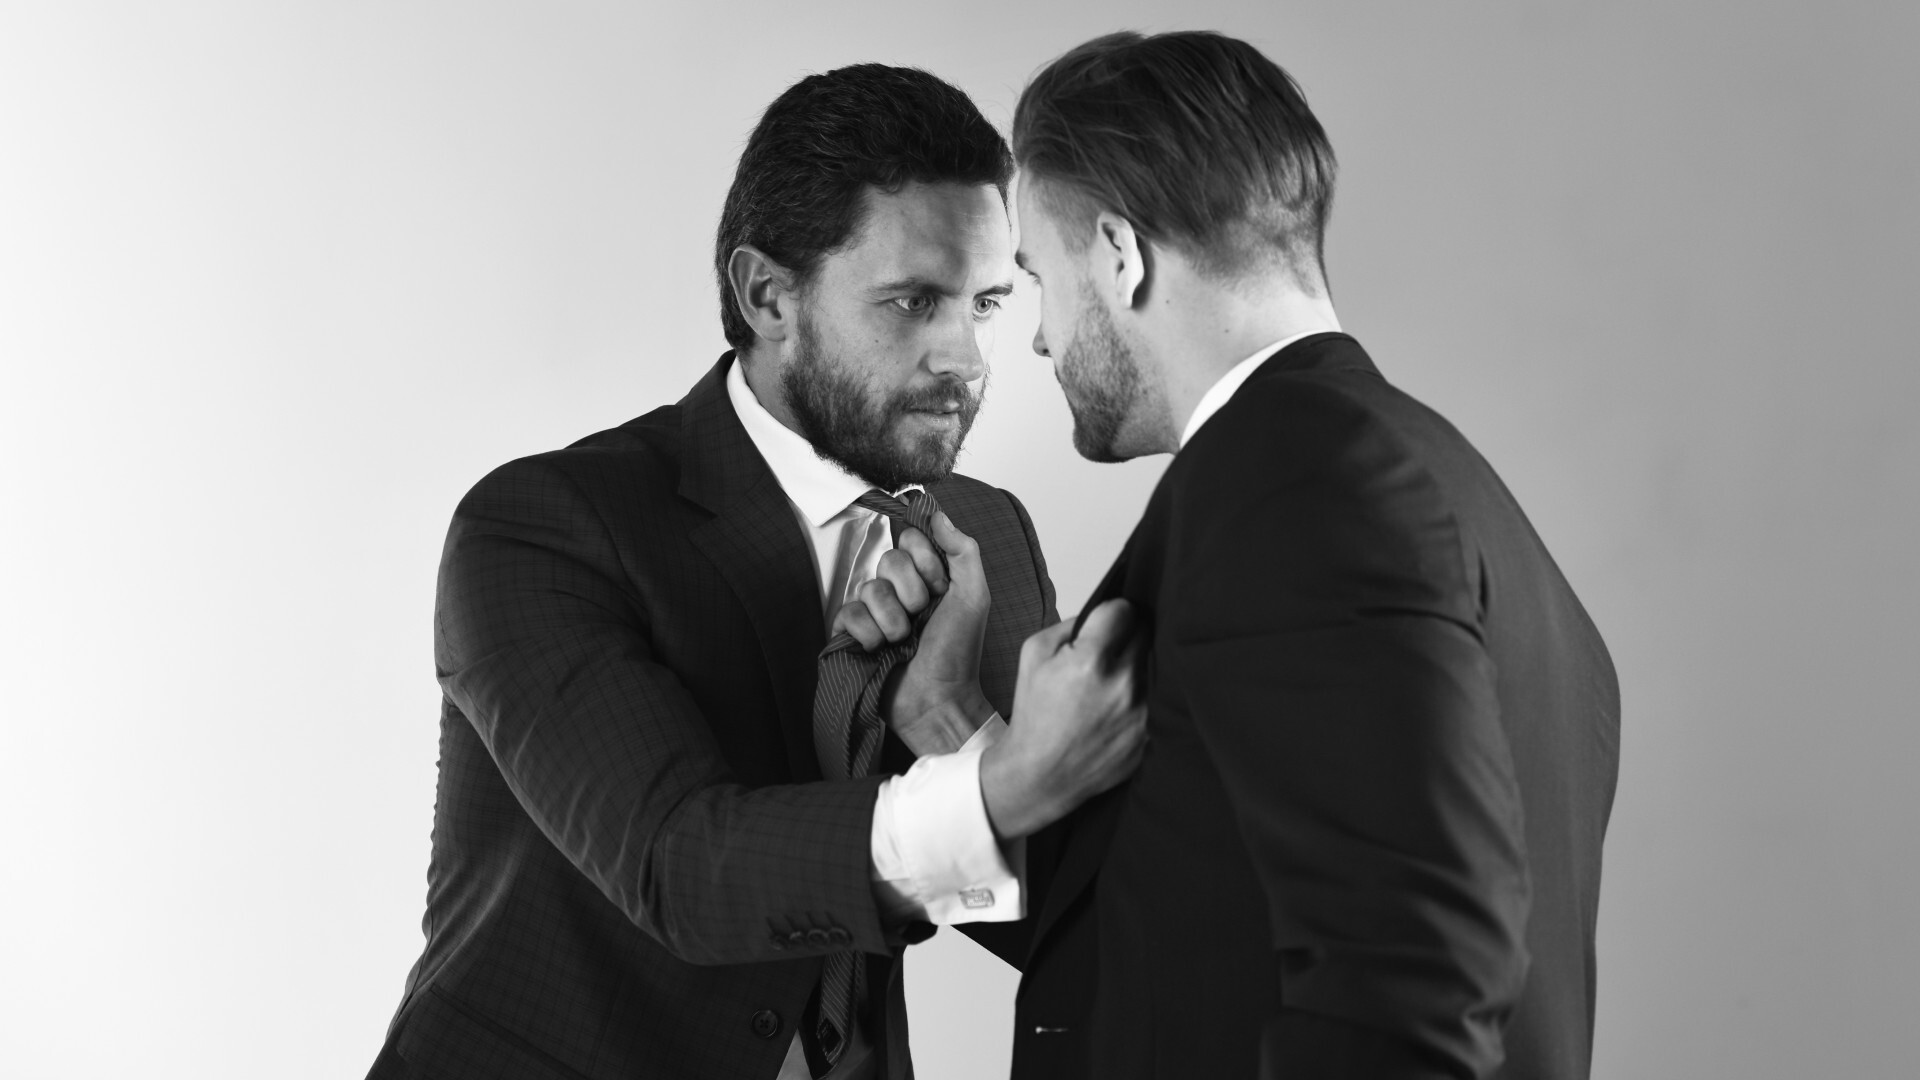 Two men glaring at each other as they hold each other’s ties